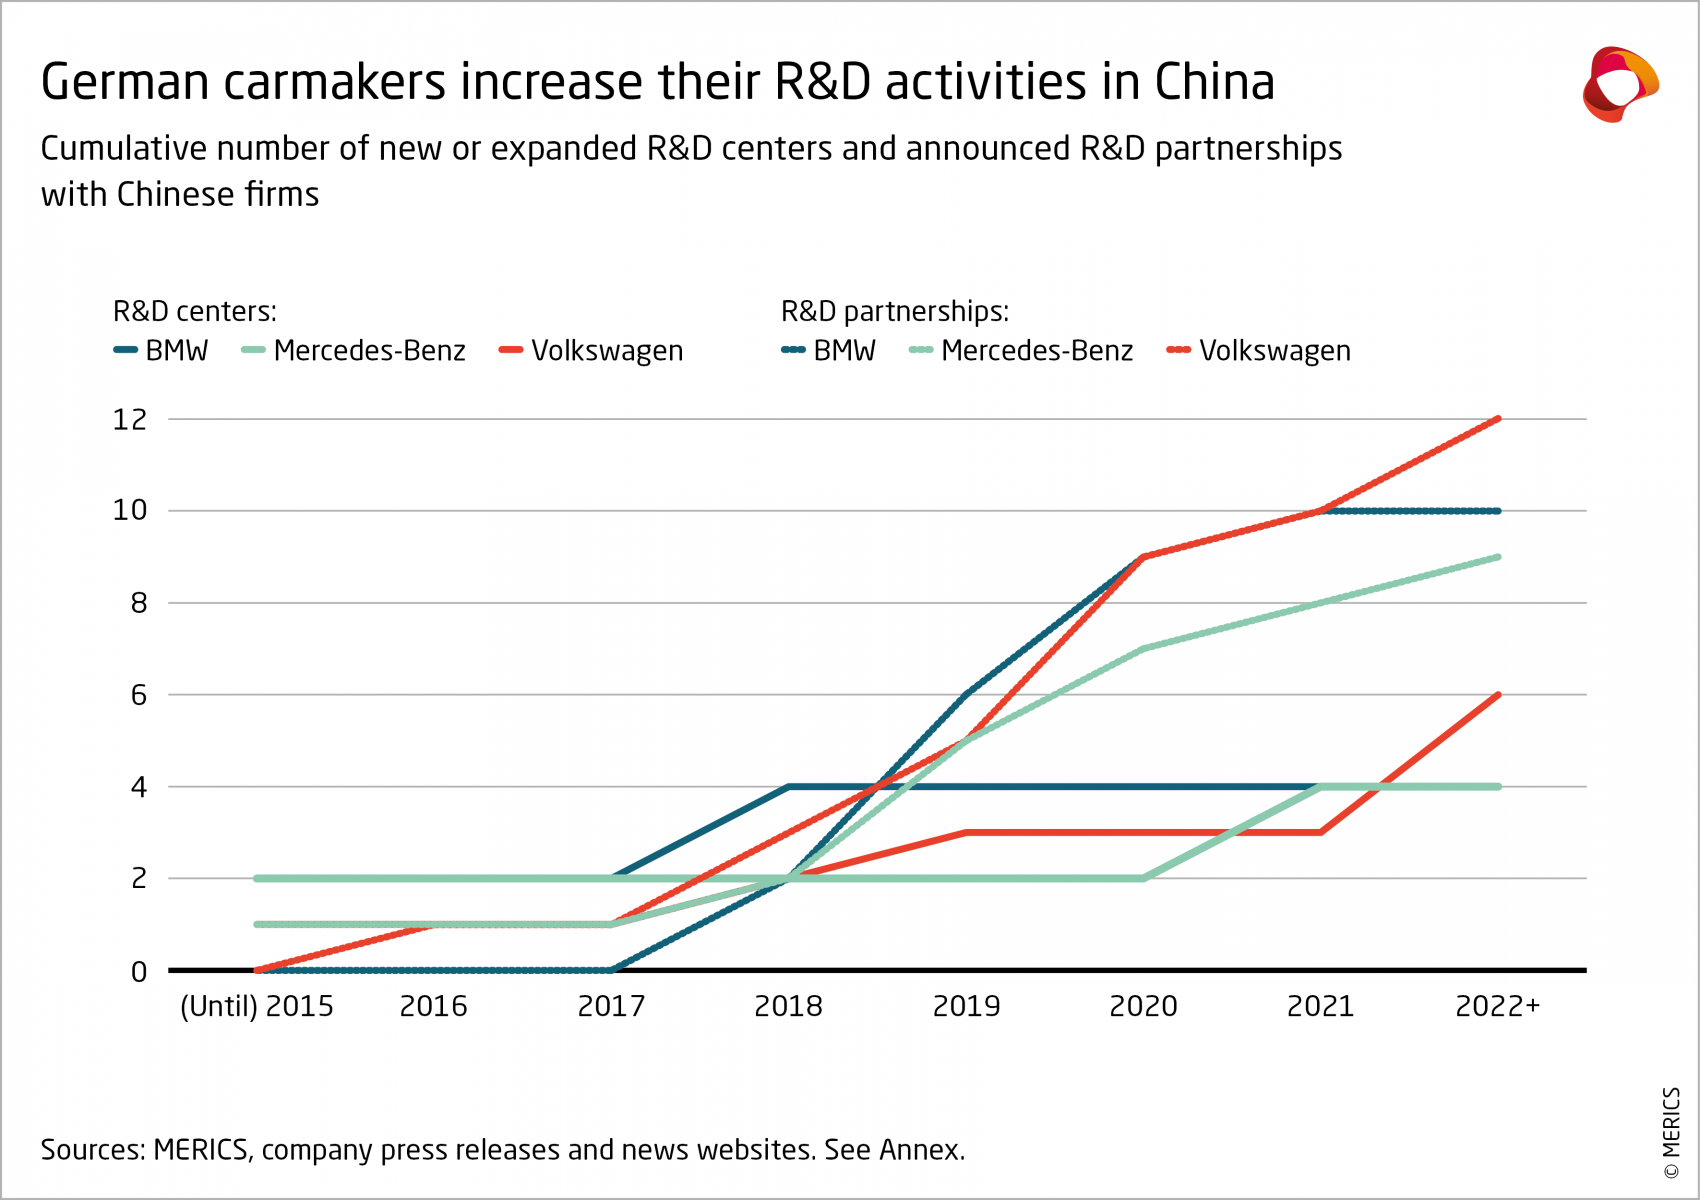 MERICS-Automotive-RD-in-China-German-carmakers-increase-their-RD-activities-in-China -Exhibit-2.png